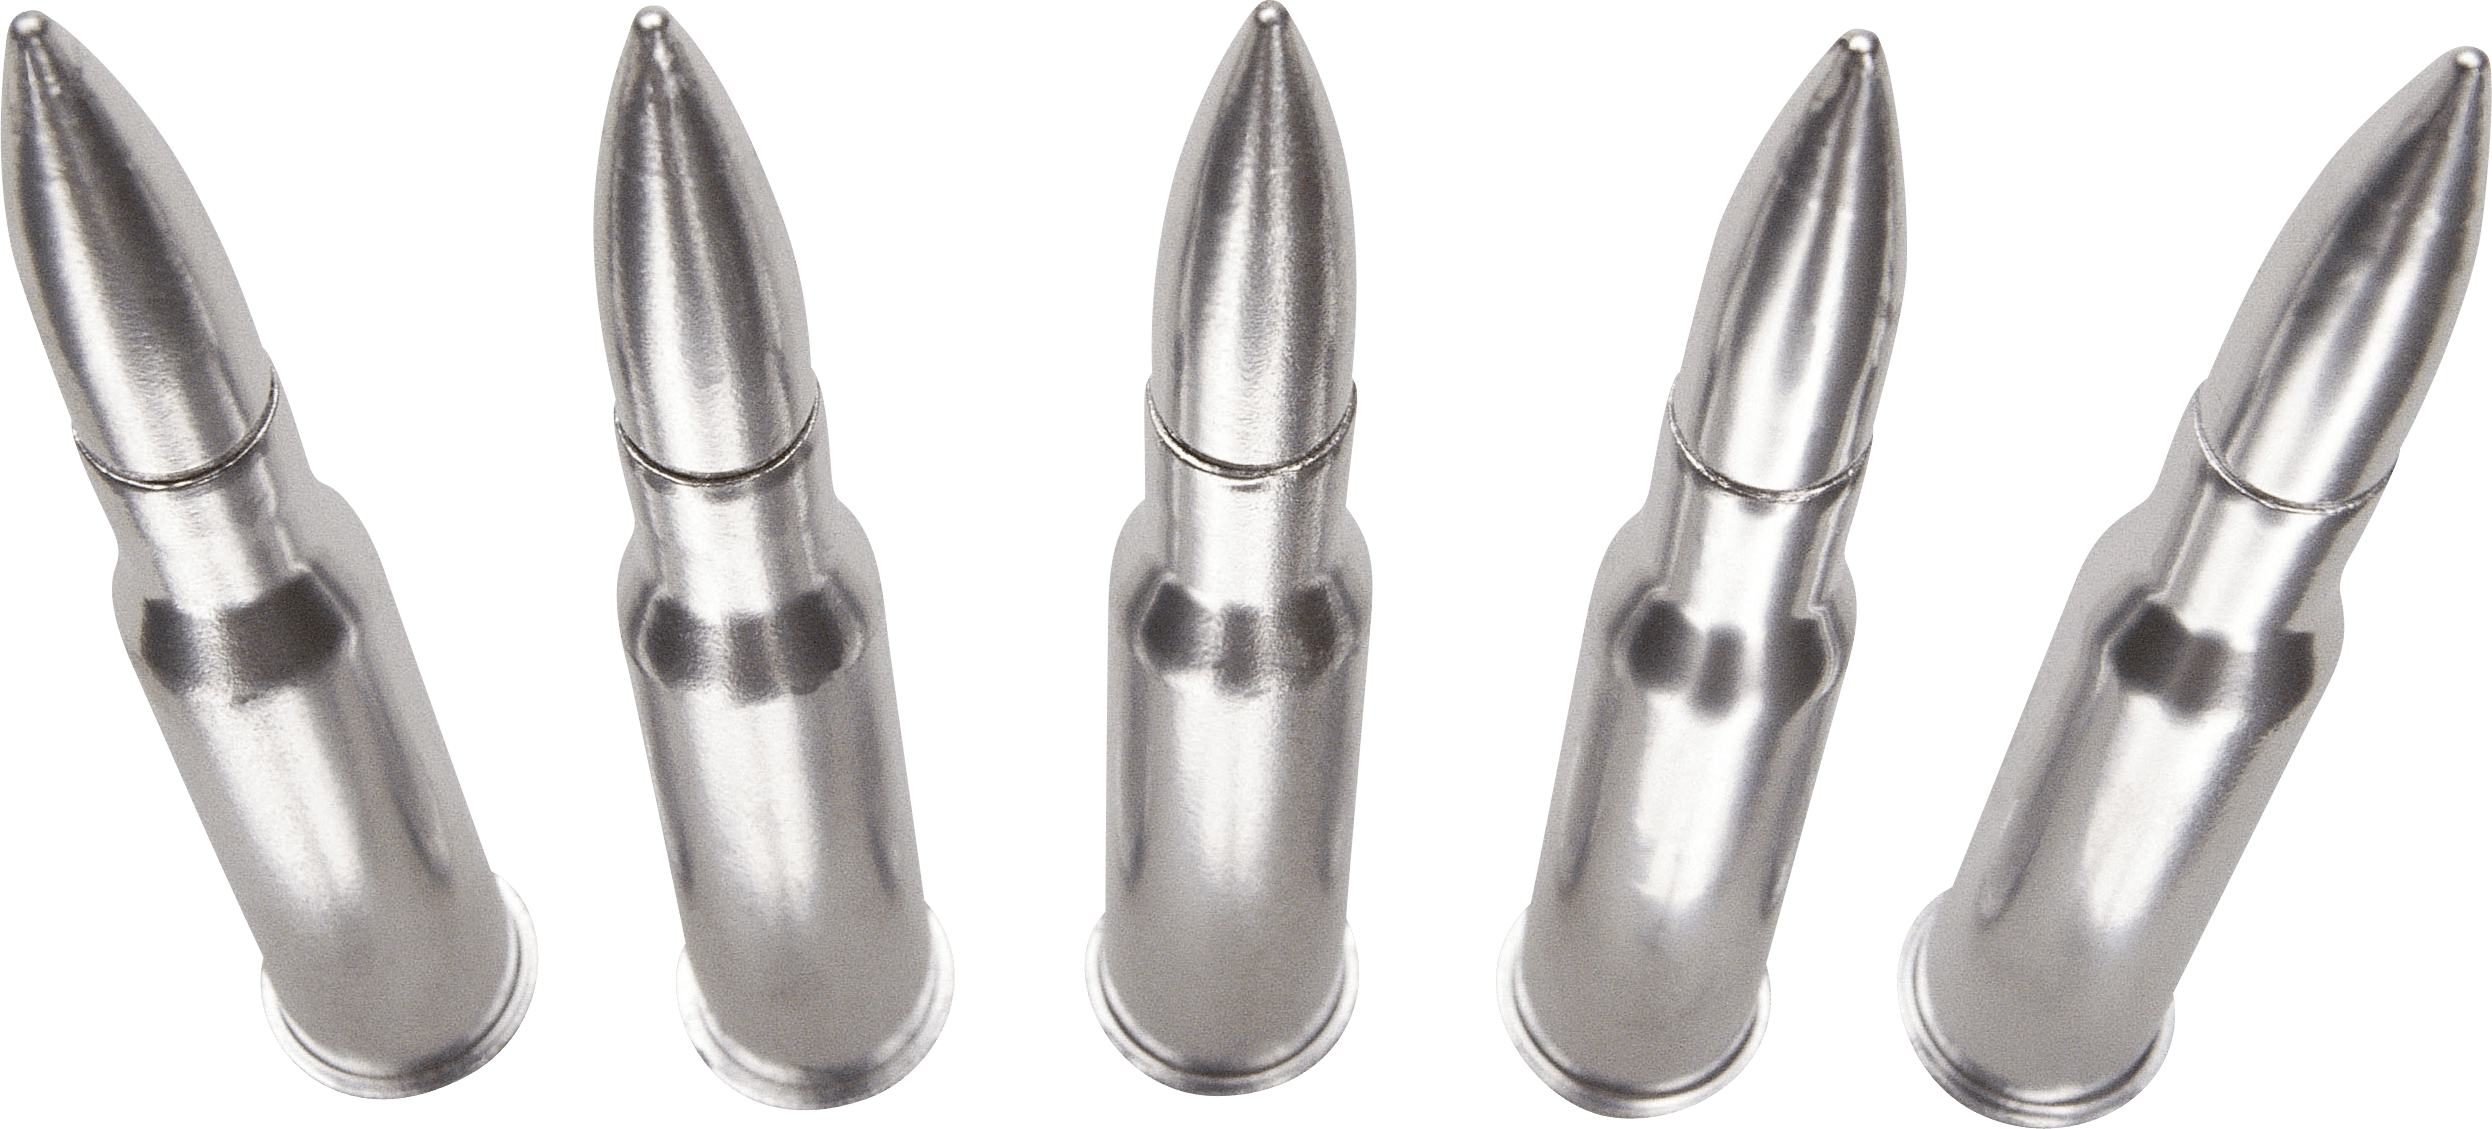 Bullets Silver Row transparent PNG - StickPNG